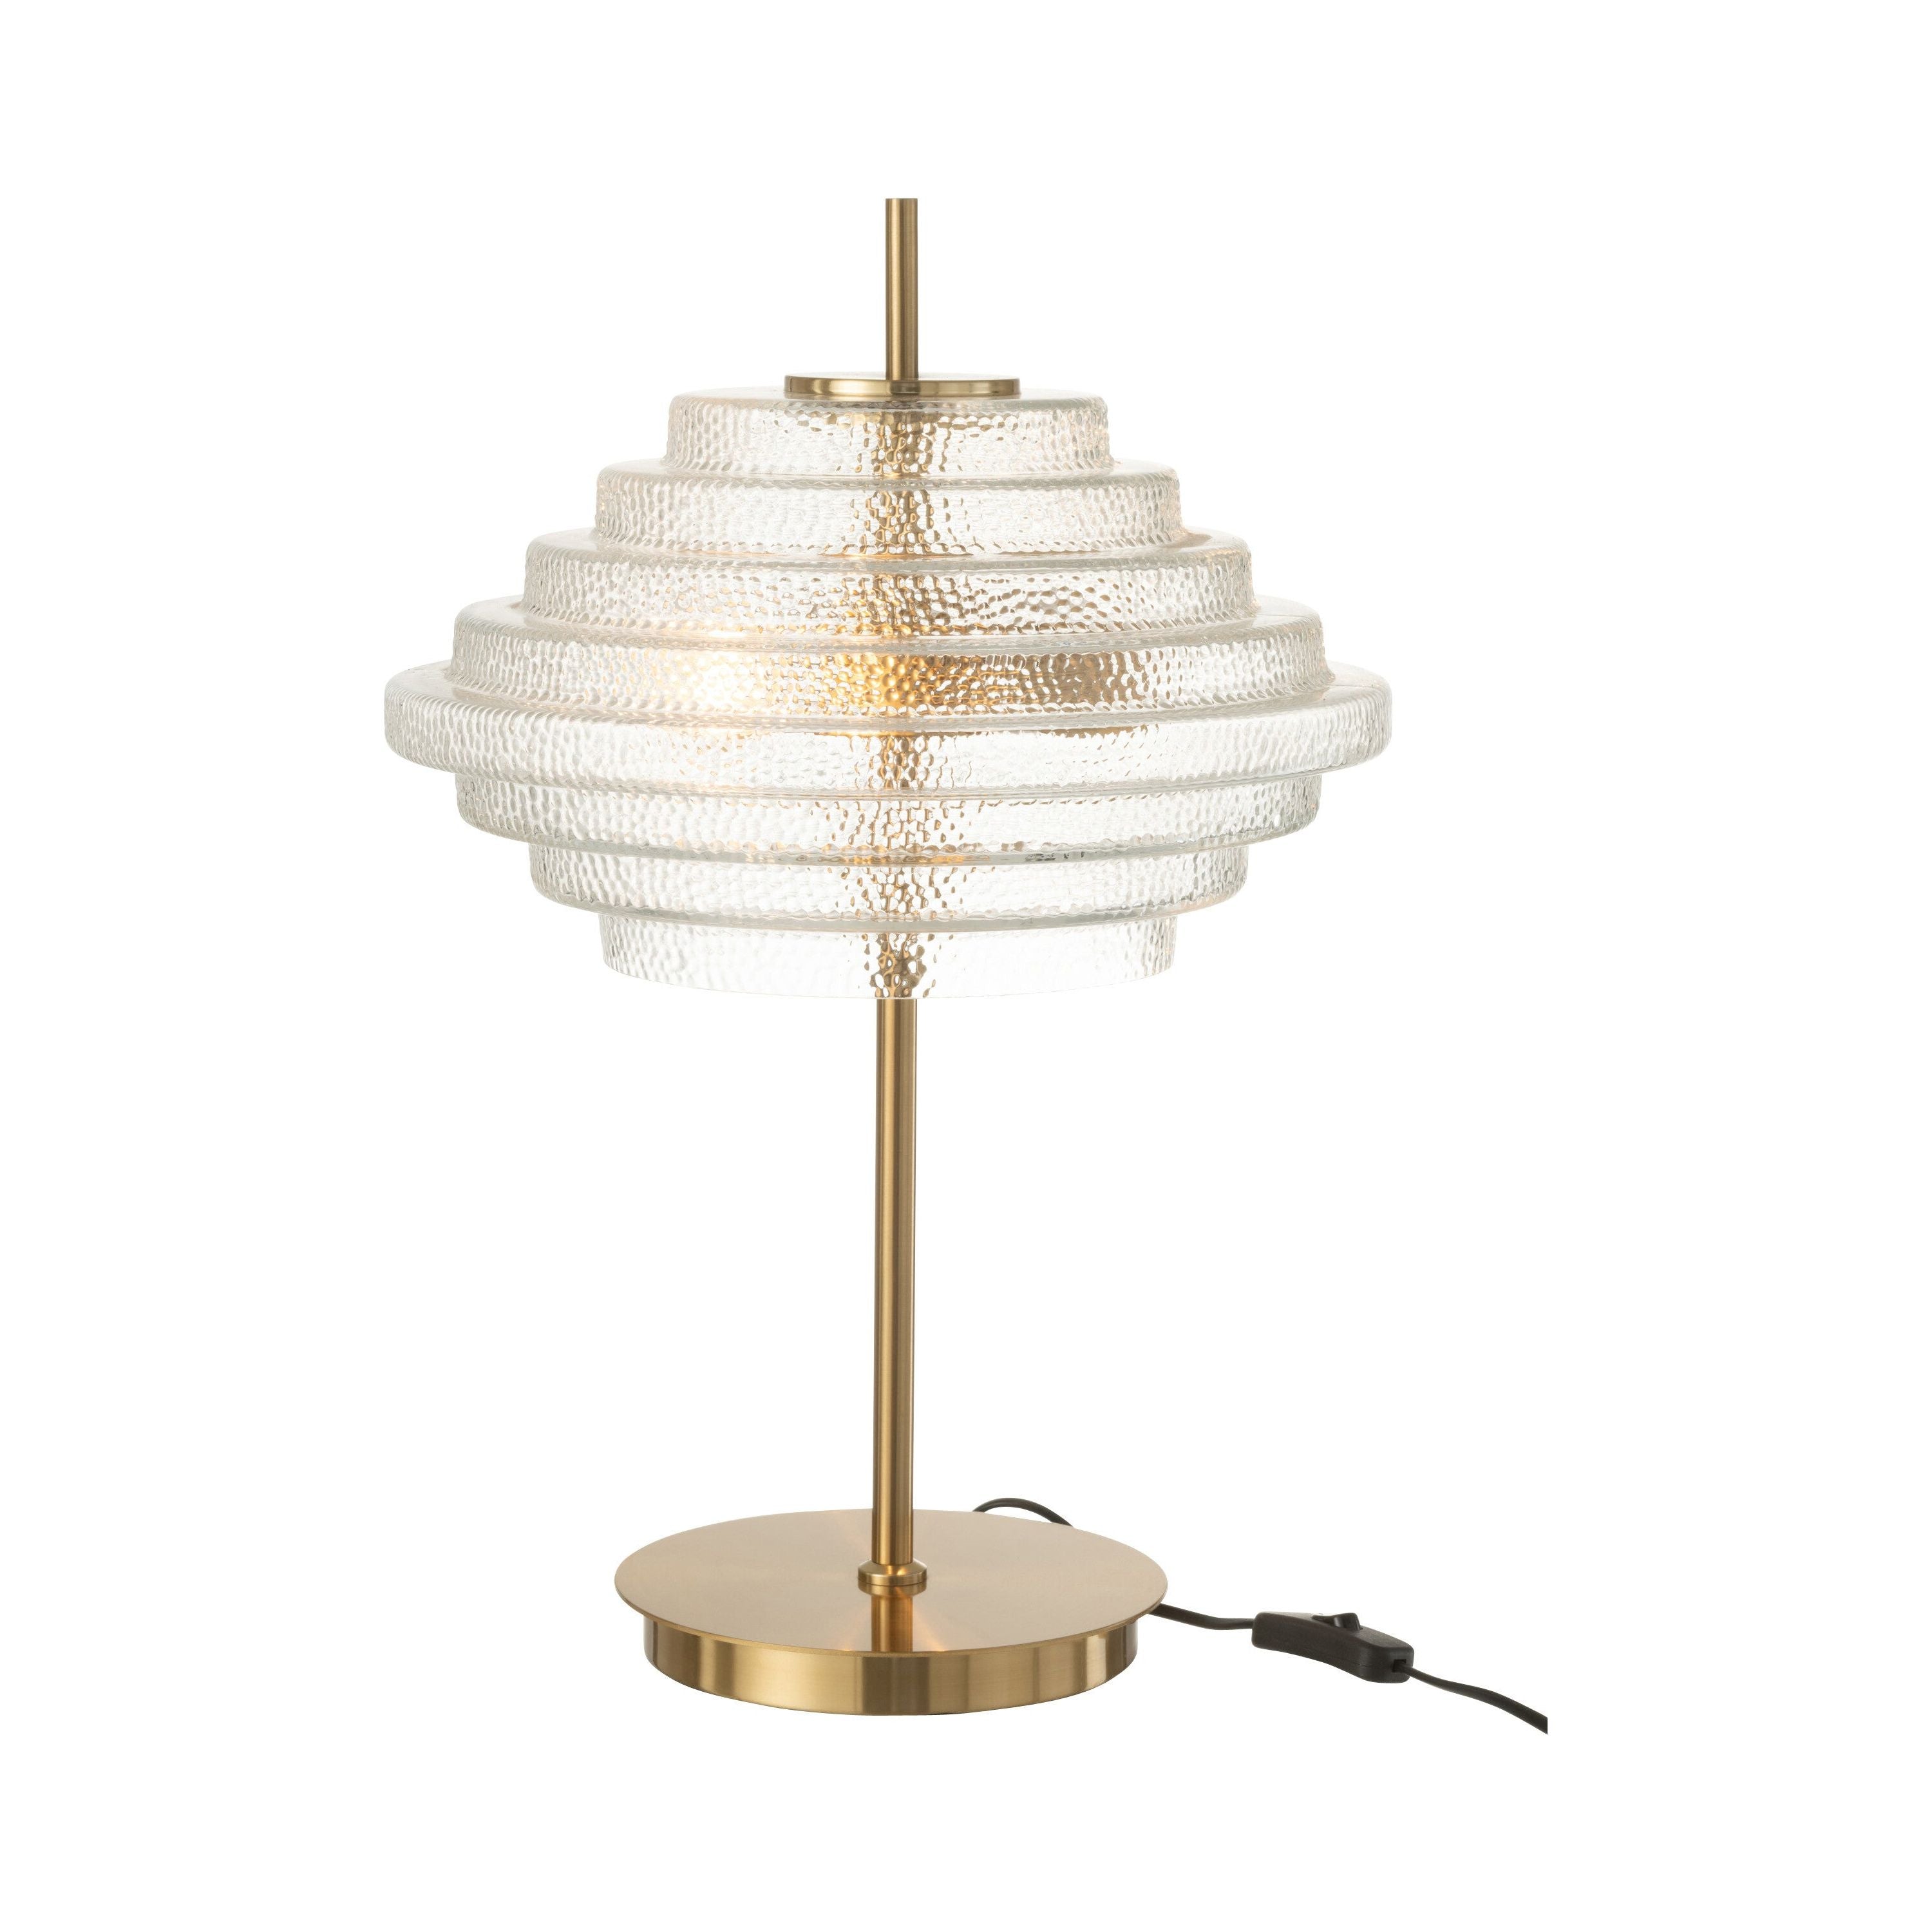 Table lamp LED Gold Metal/glass Translucent